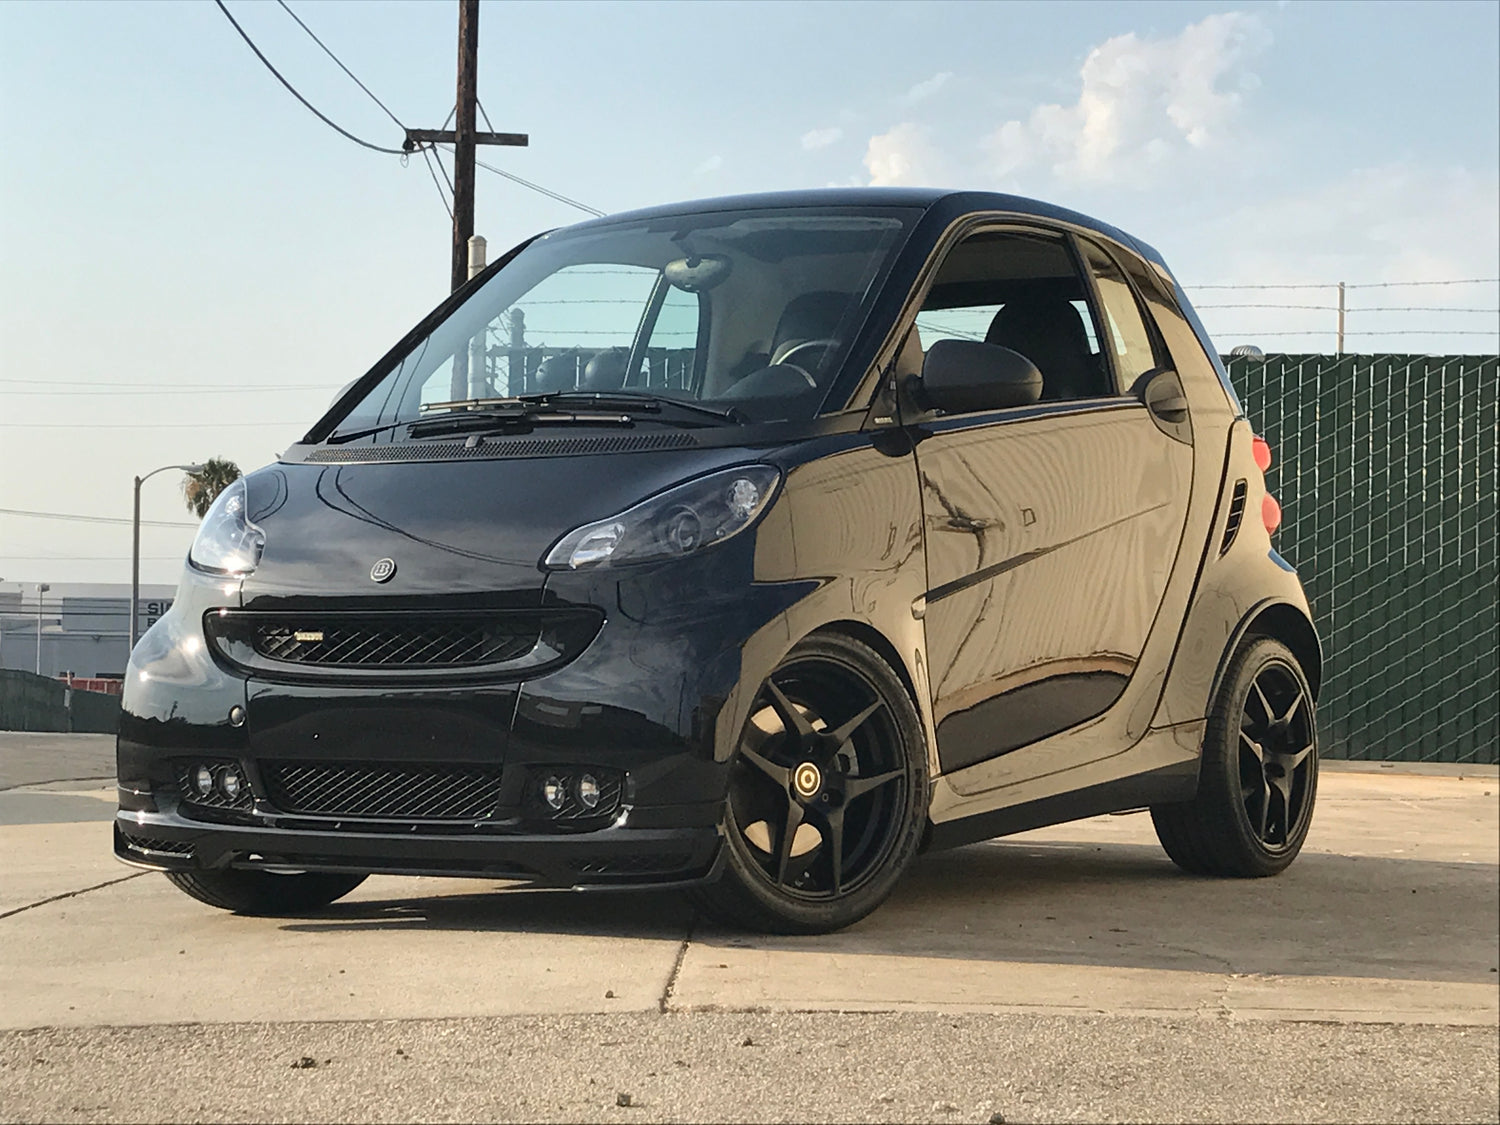 Smart Fortwo 451 – CNBAutoGroup